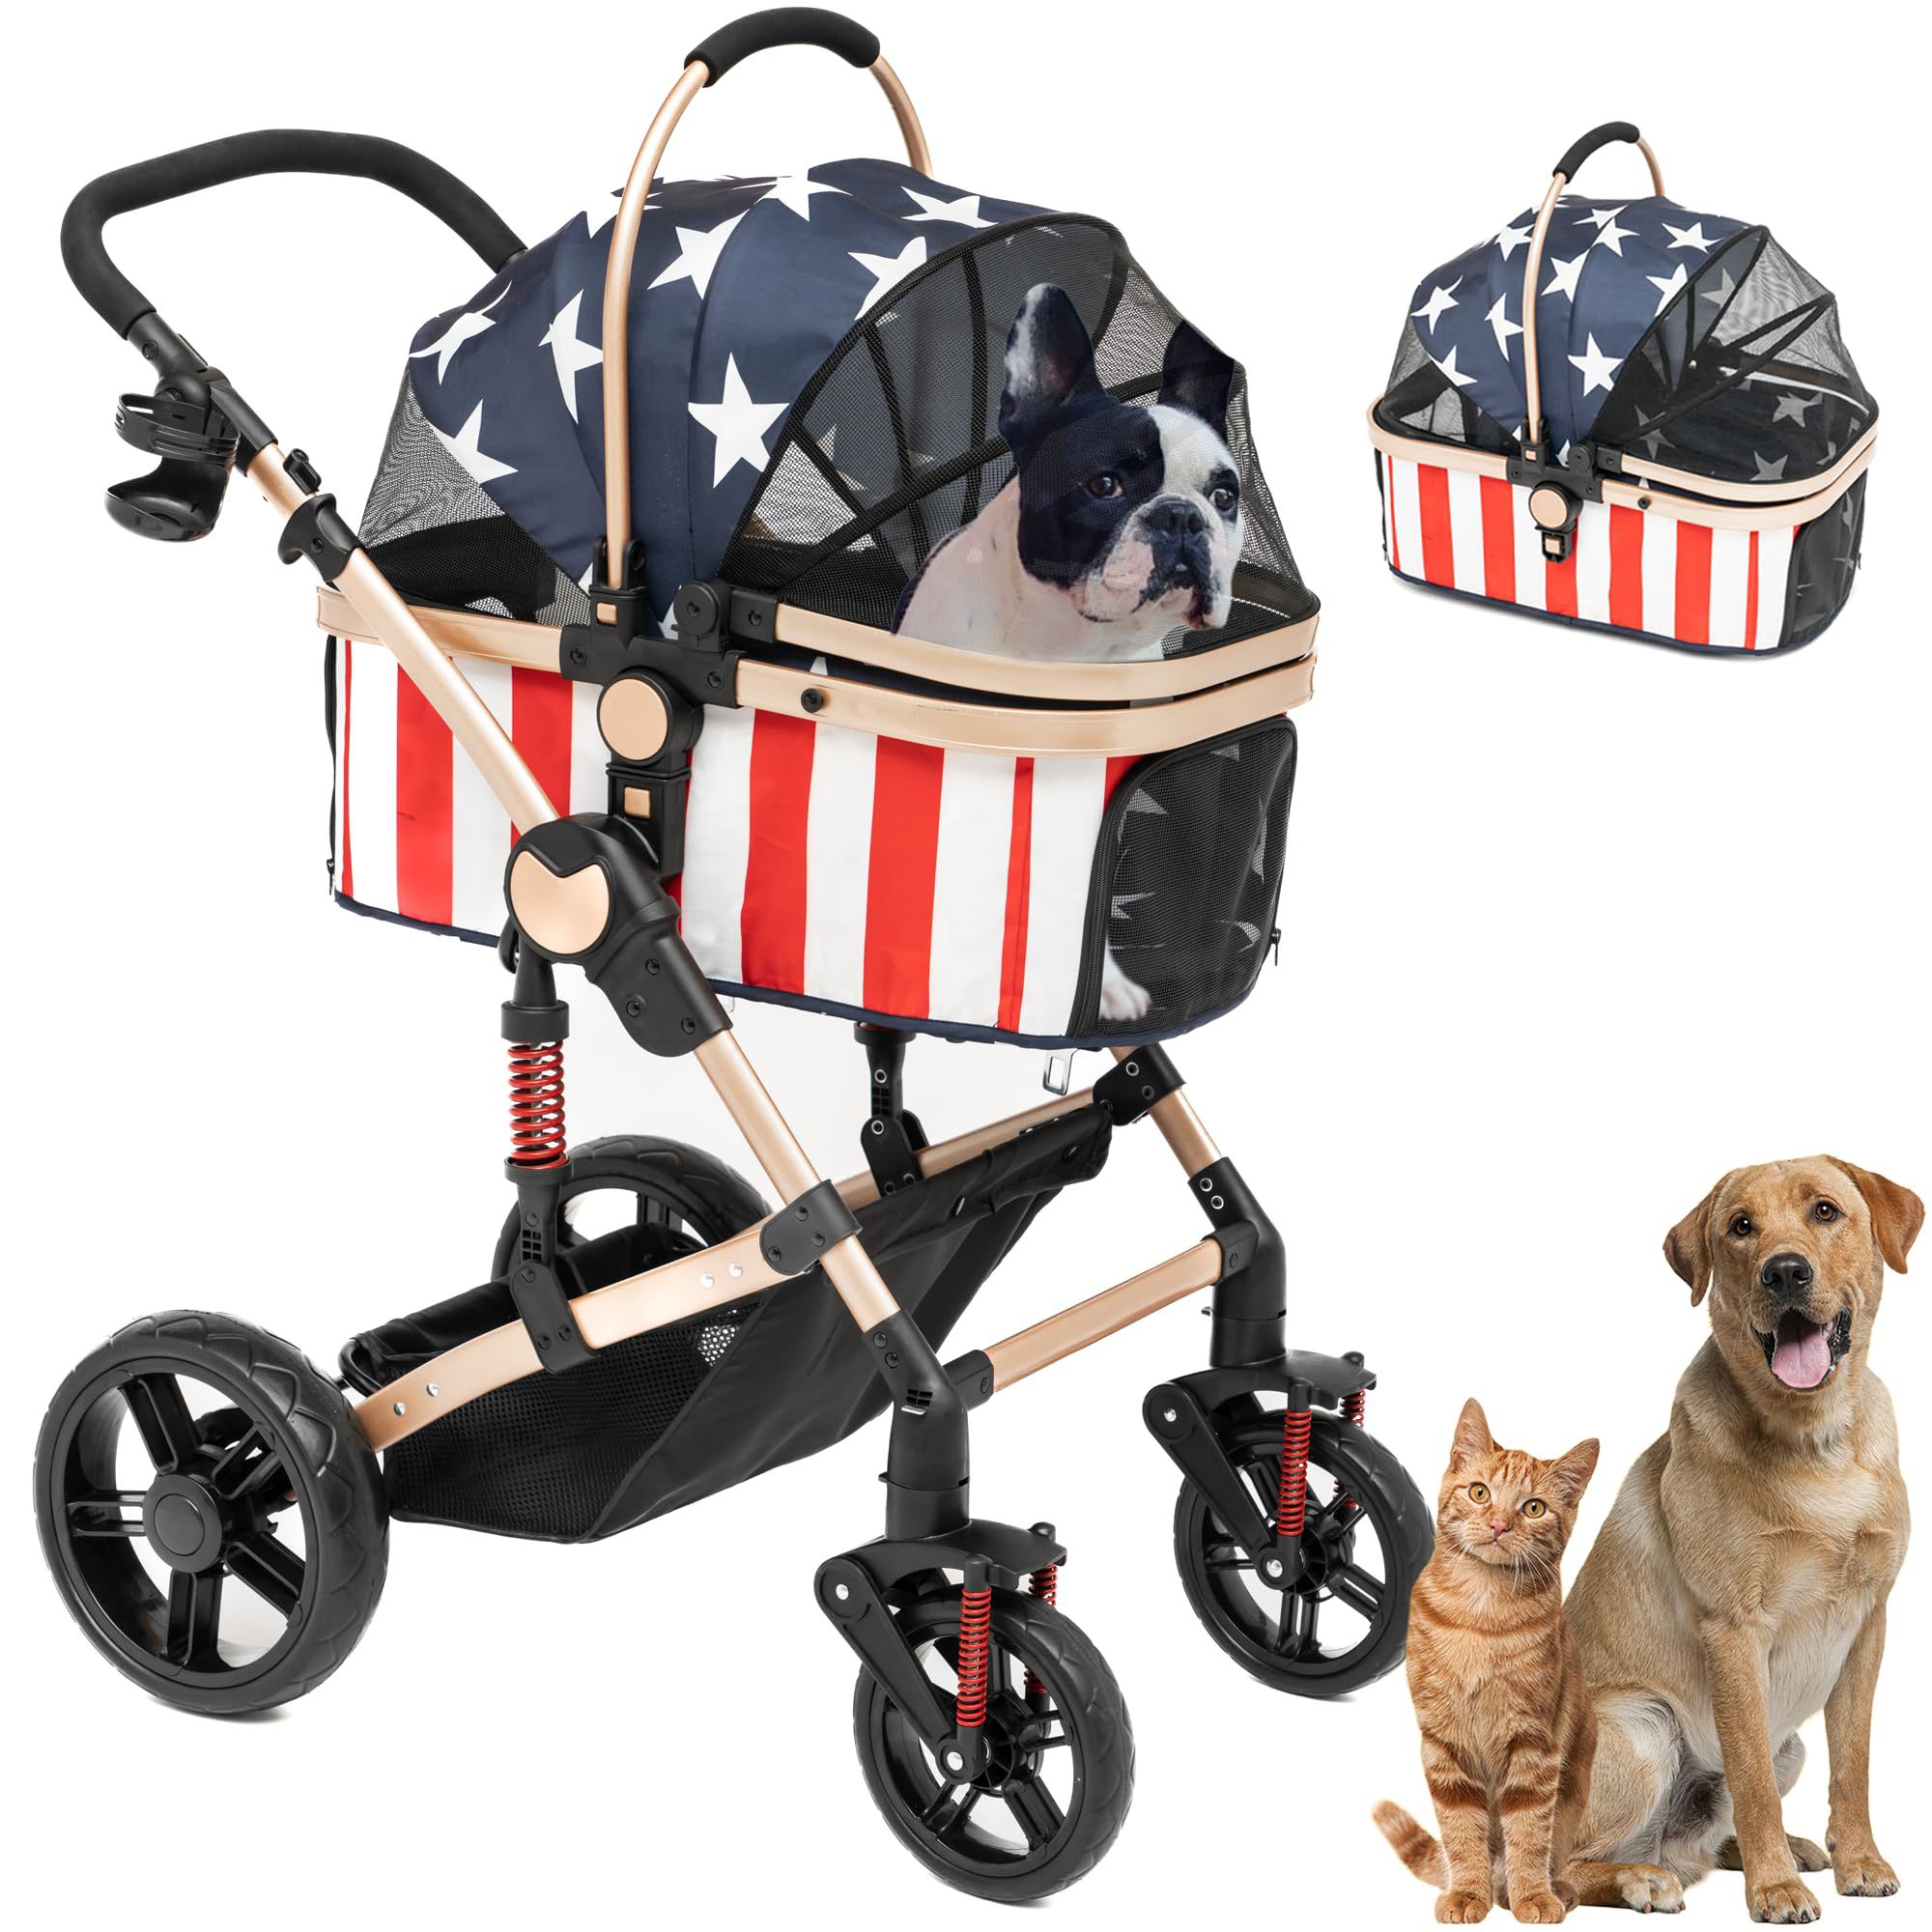 Pet Stroller,Dog Stroller 3 in 1 For Medium Small Dogs With Storage Basket And Cup Holder